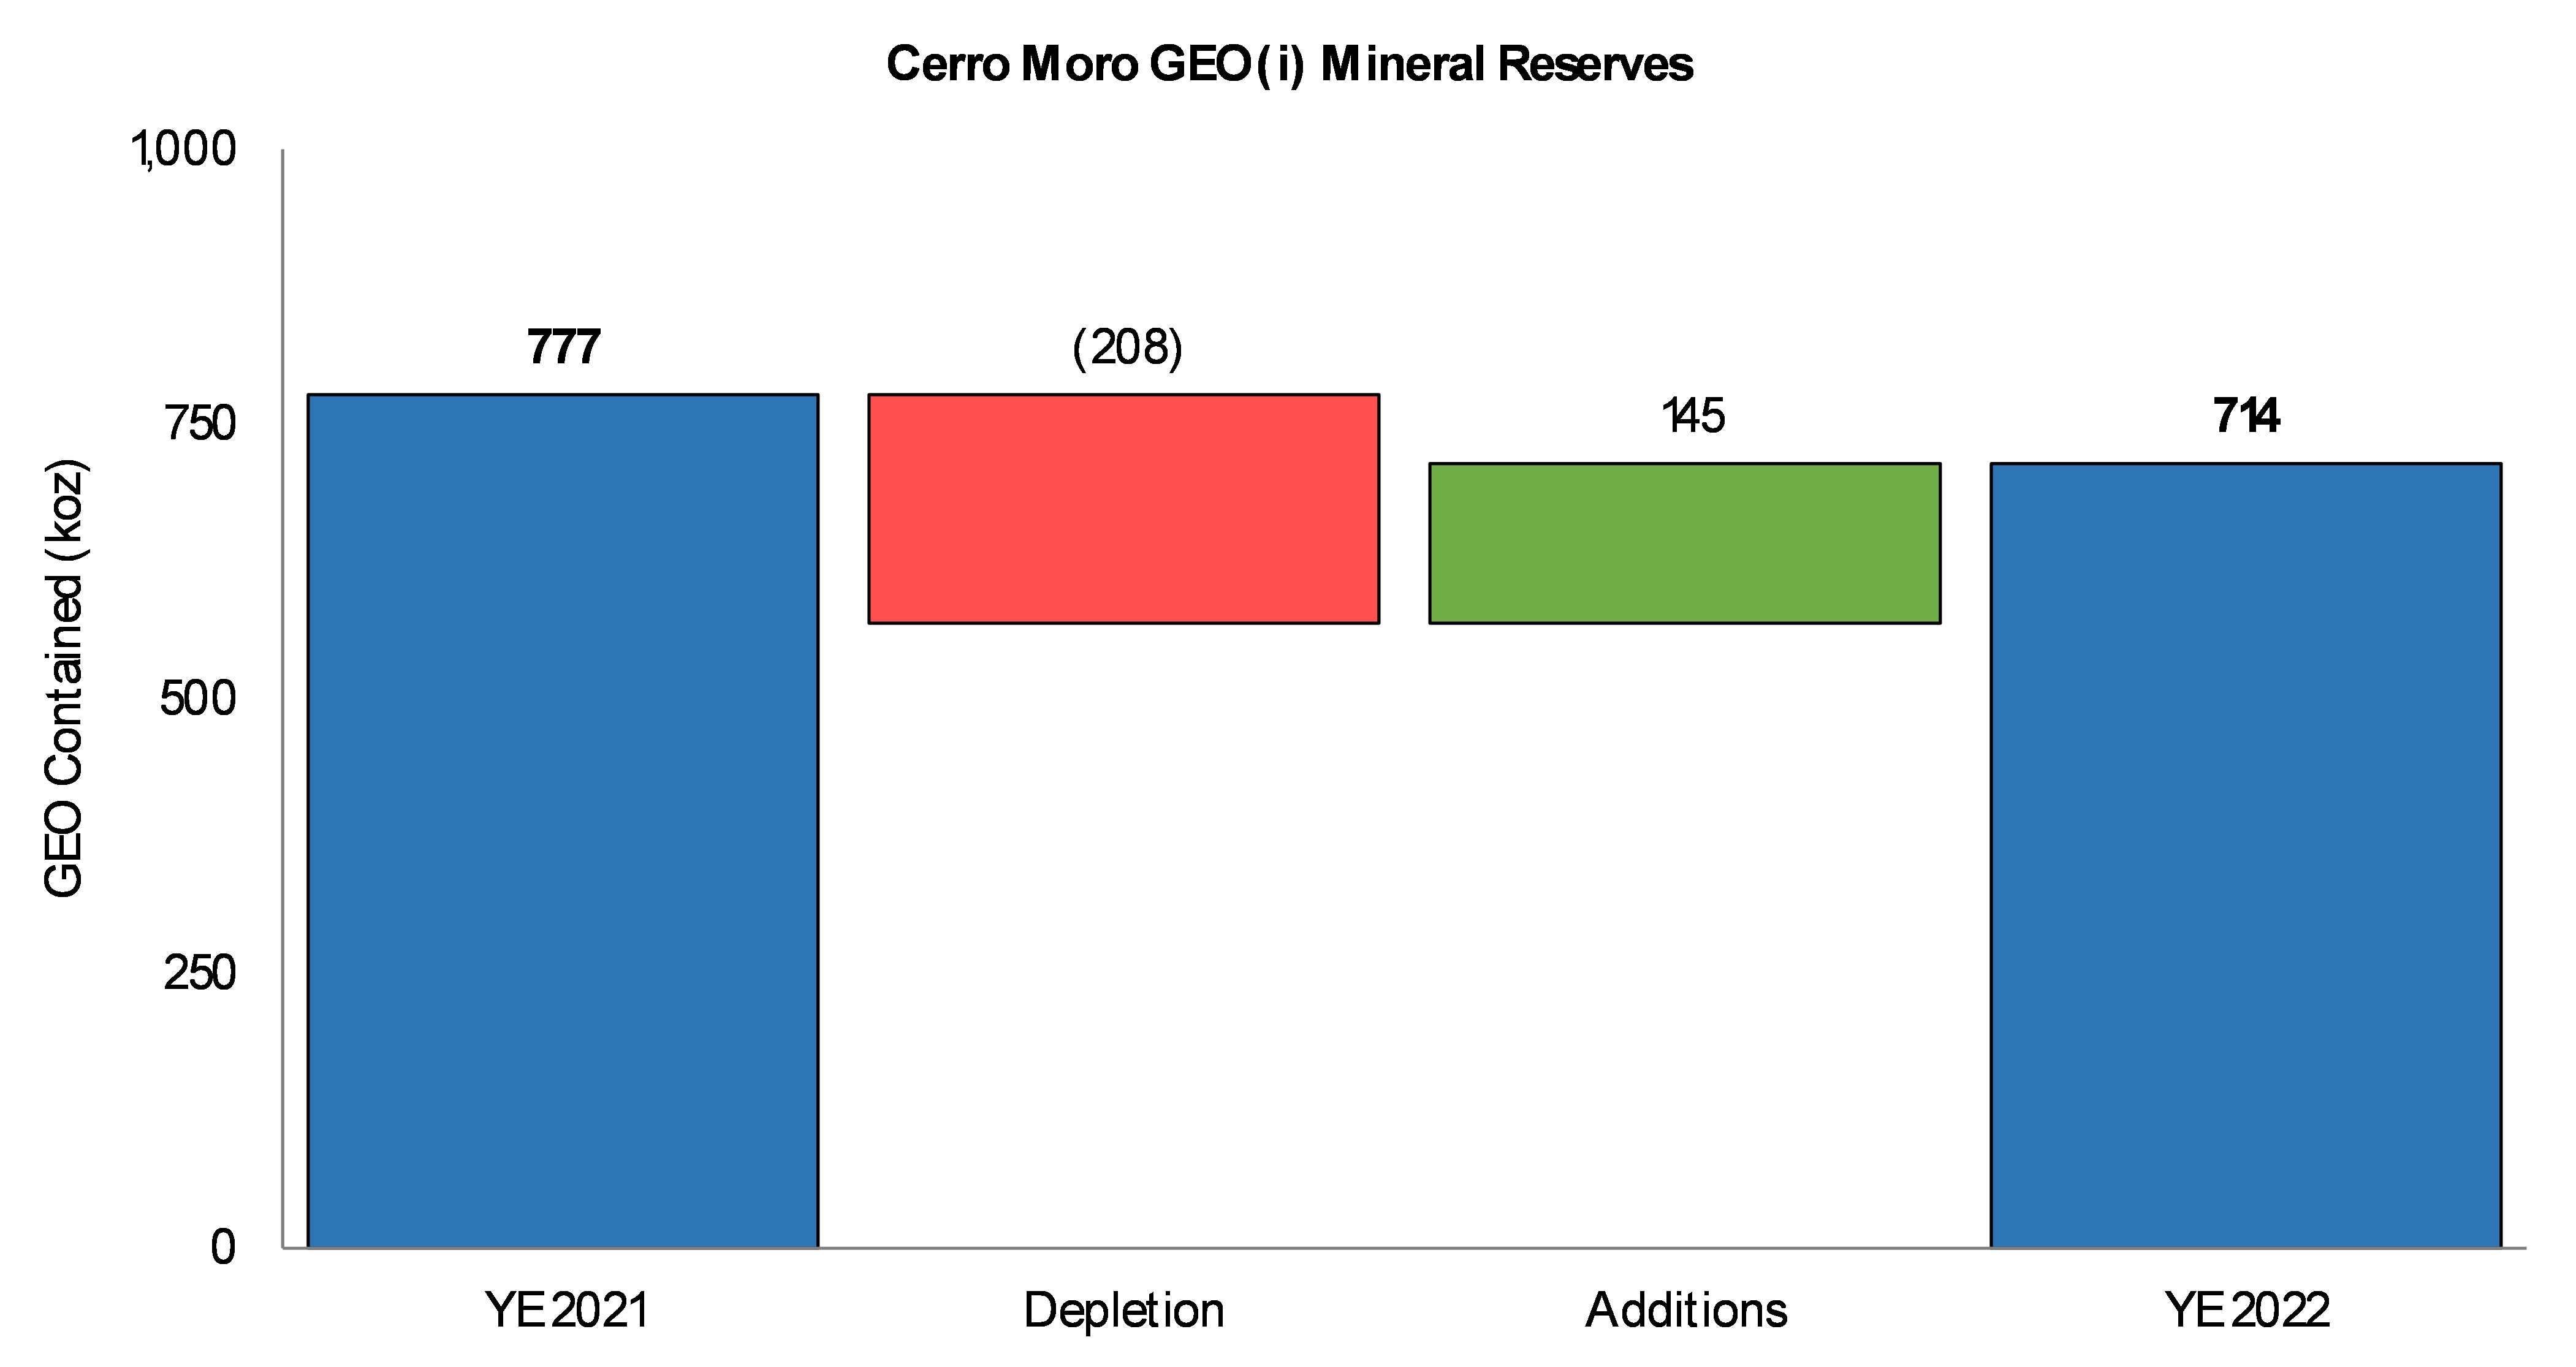 Change in Proven and Probable Mineral Reserves at Cerro Moro